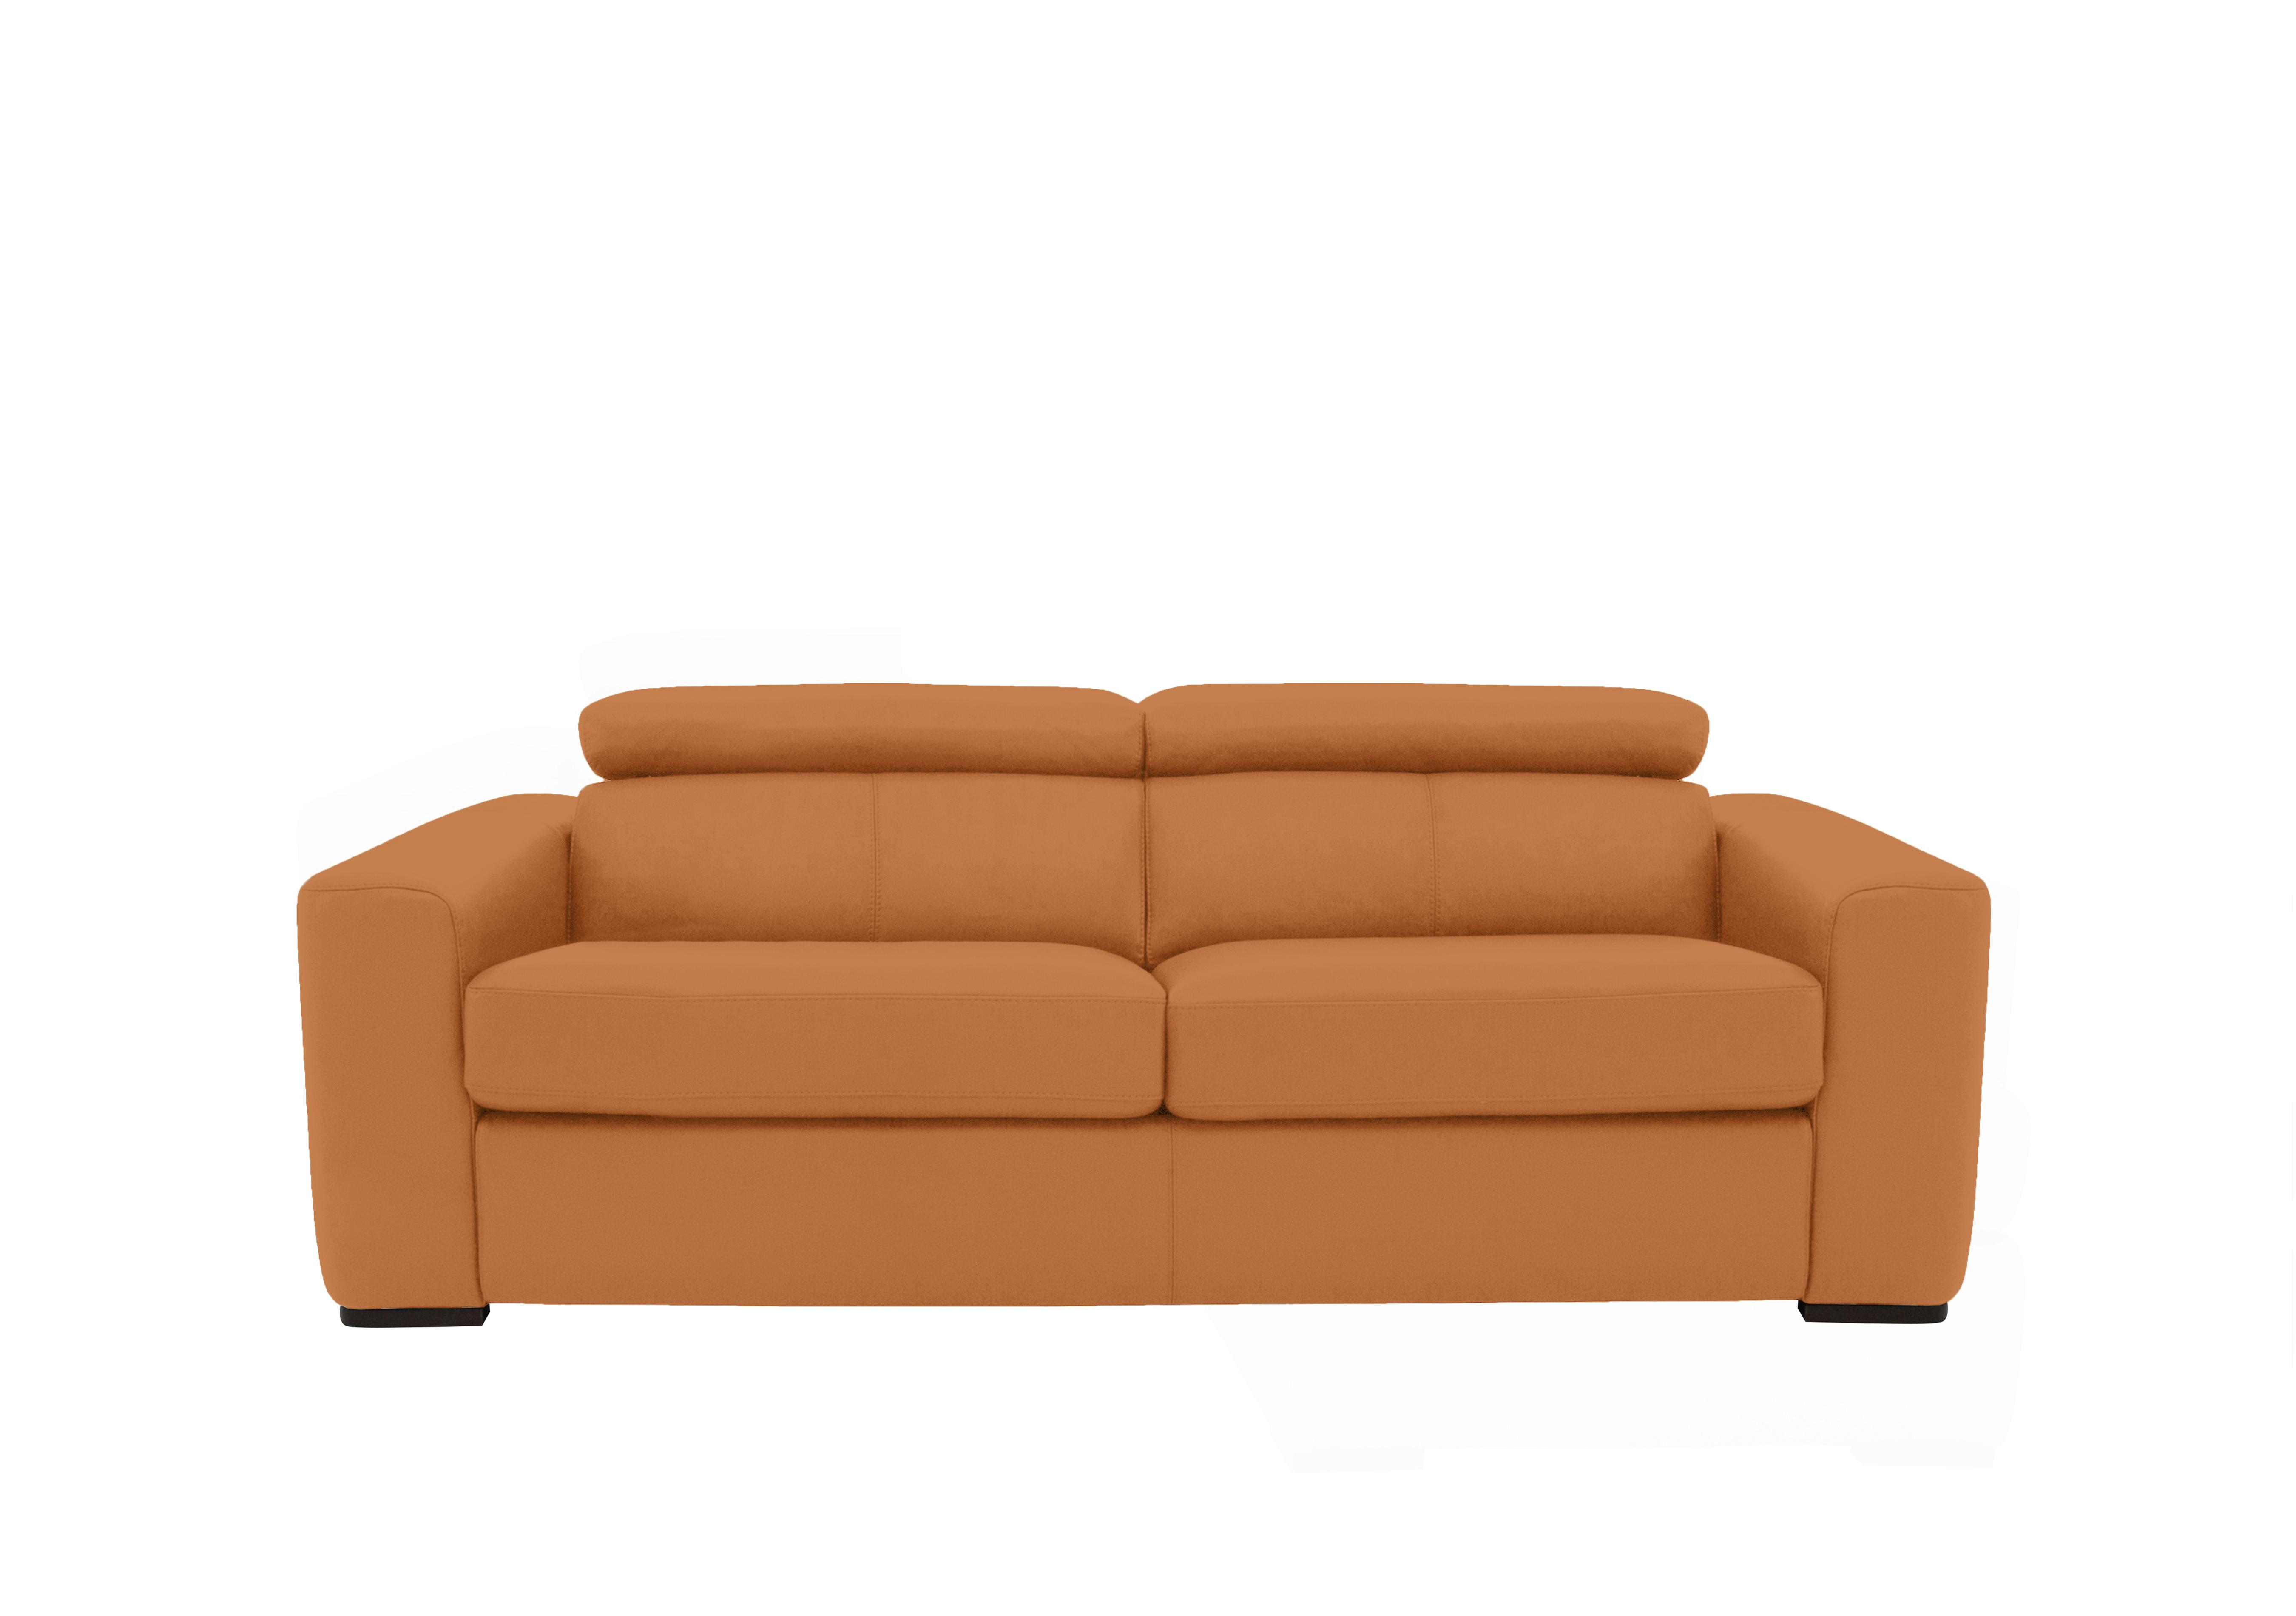 Infinity 3 Seater Leather Sofa Bed in Bv-335e Honey Yellow on Furniture Village